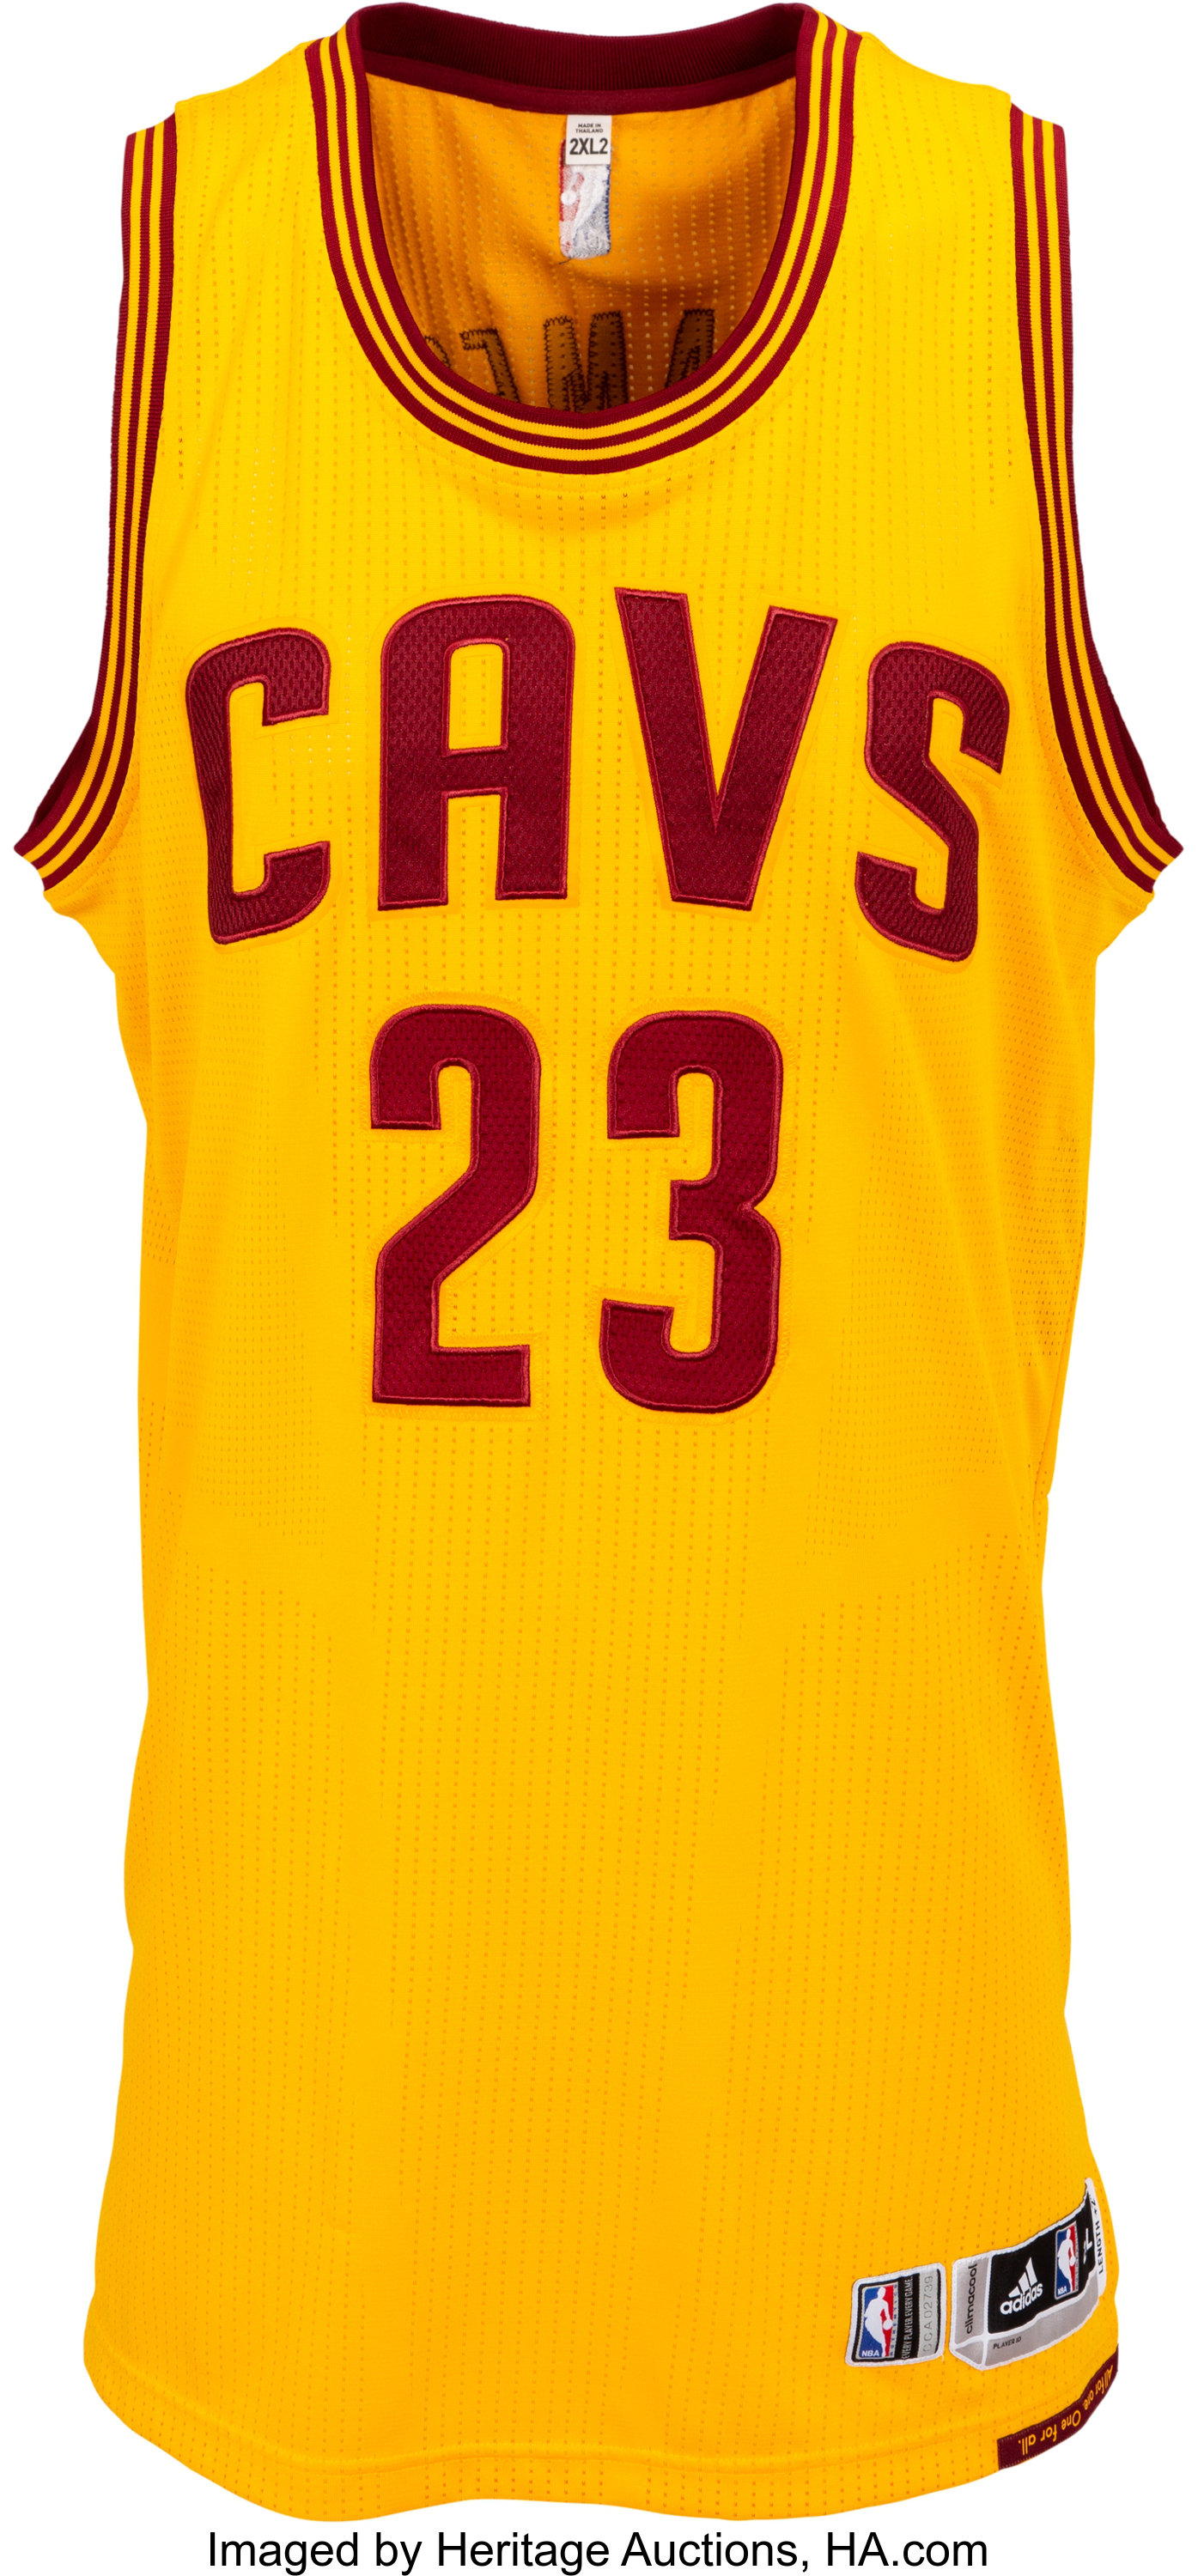 Cavs 22-23 Jersey Launch